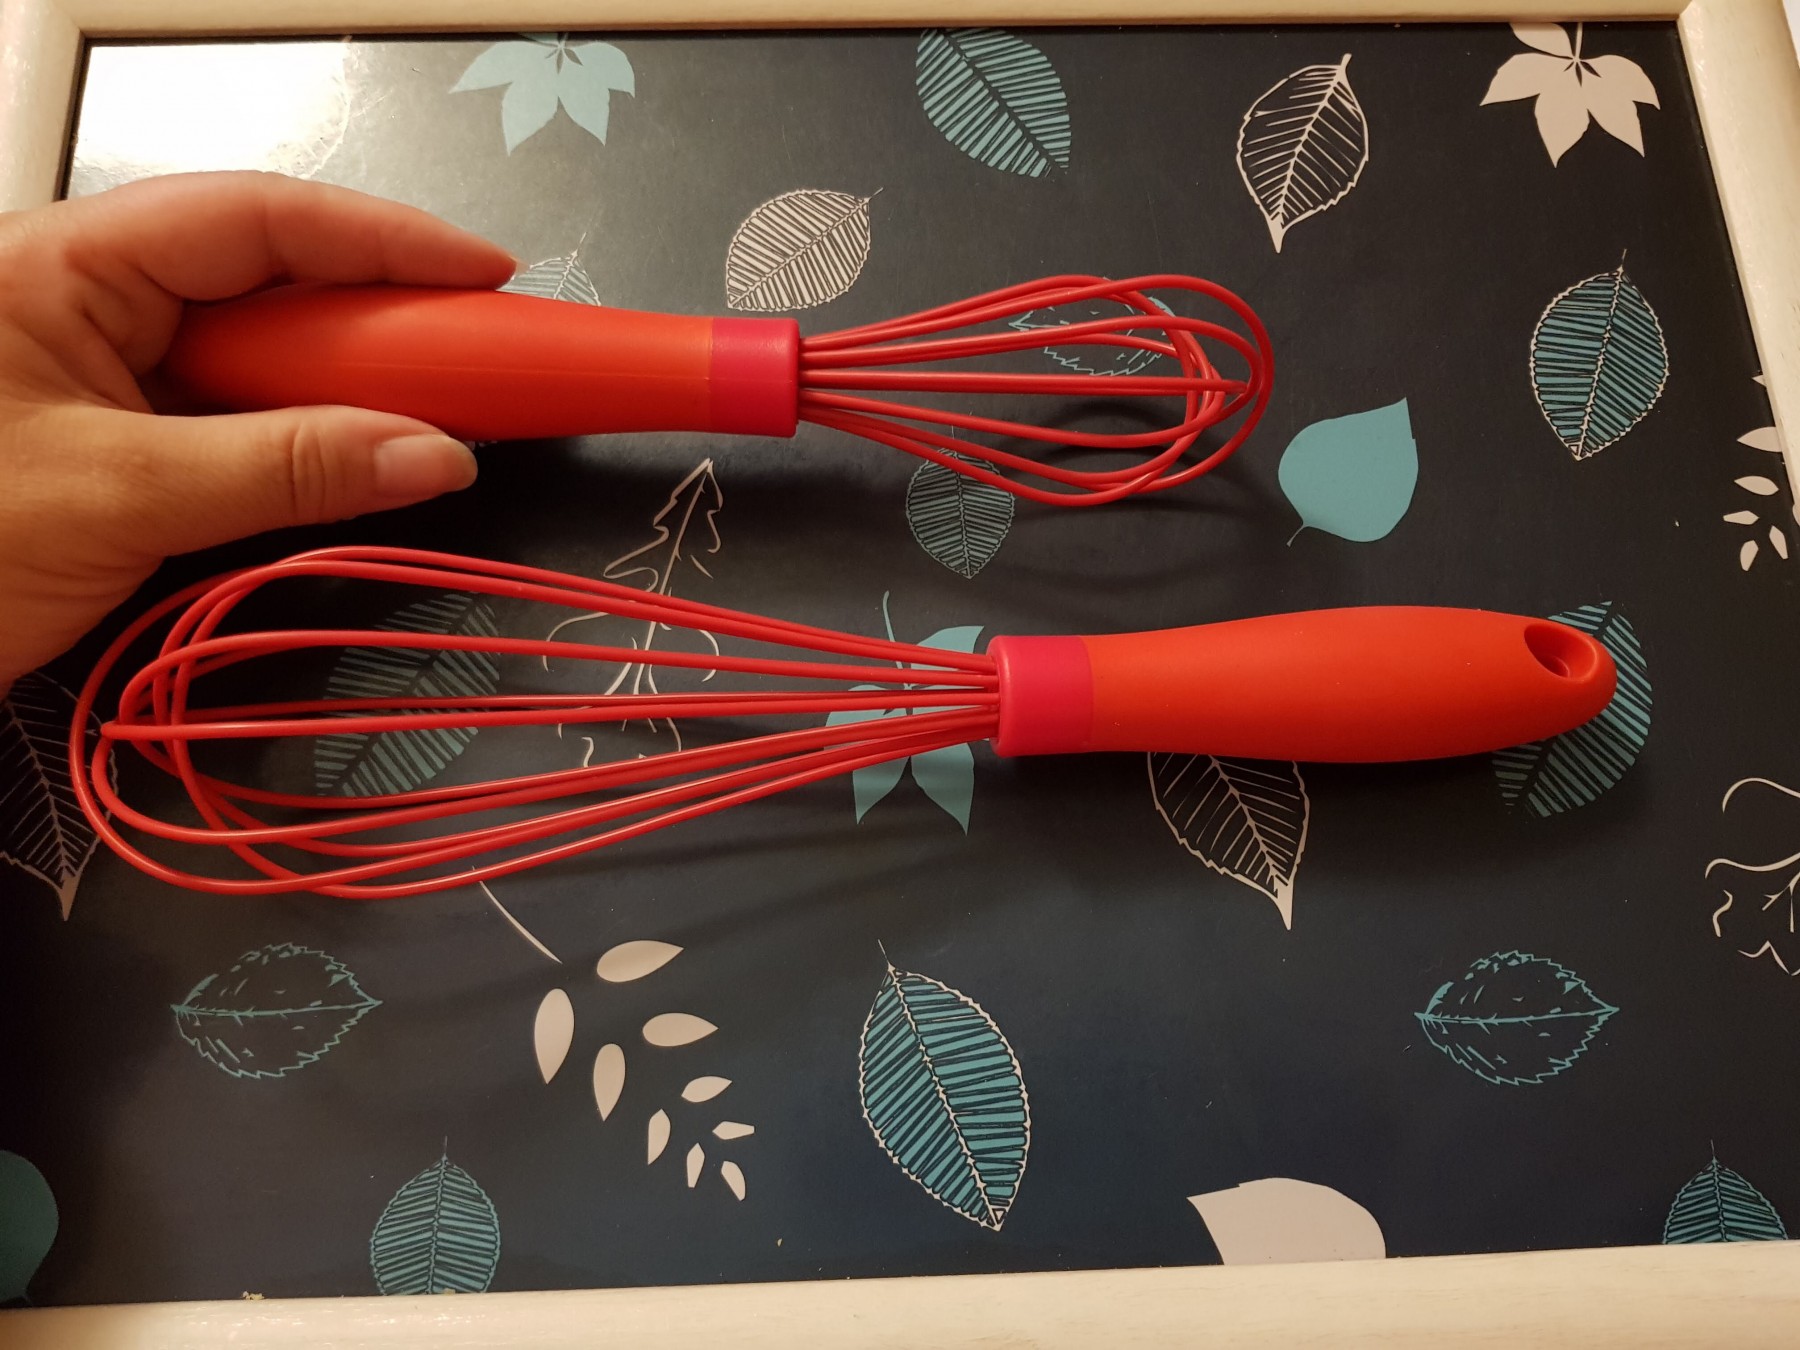 Best whisks I have ever had!